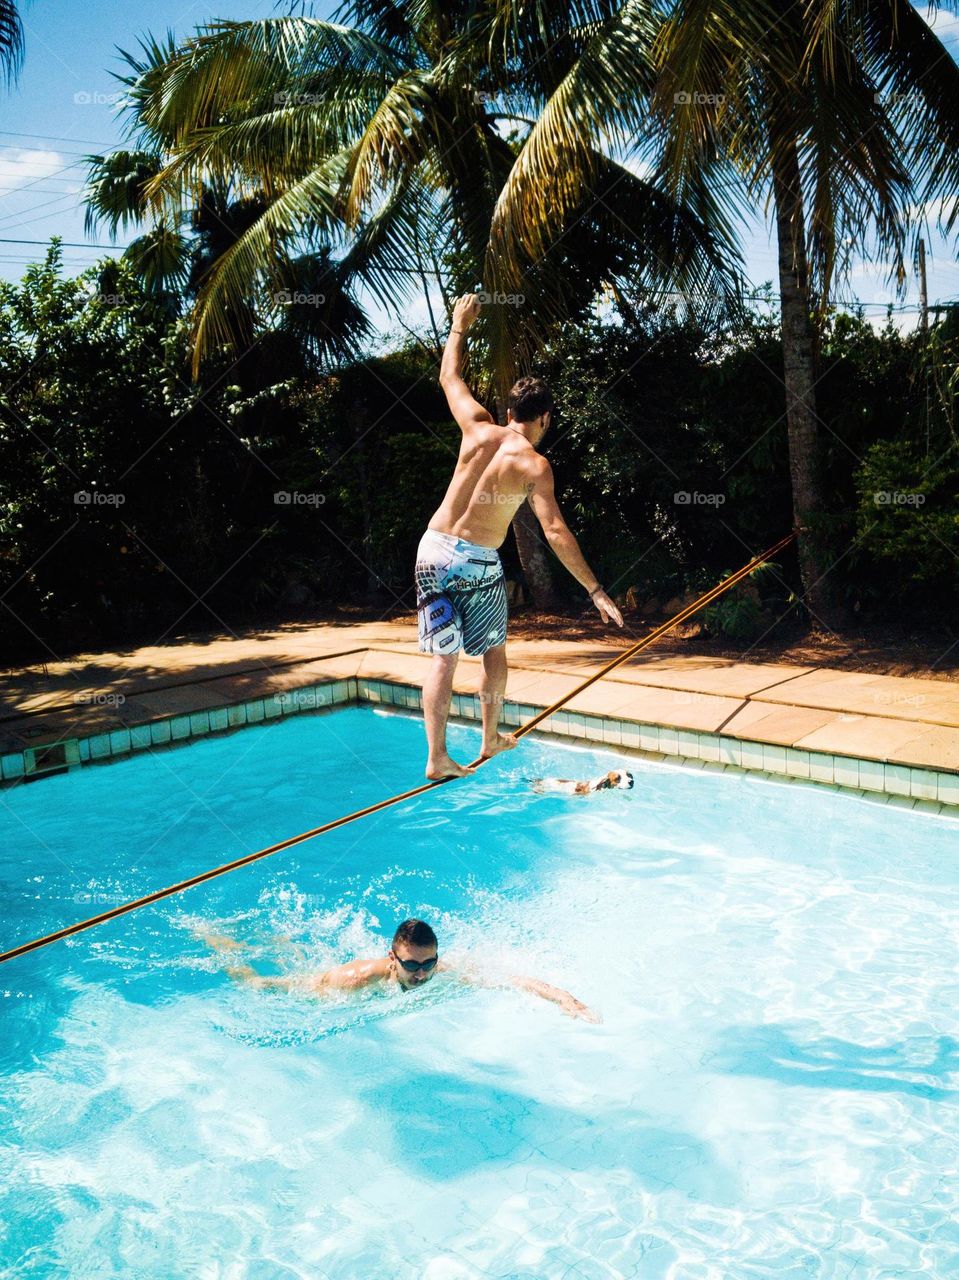 Man swimming on the pool, and another man walks on a slack line at summertime.